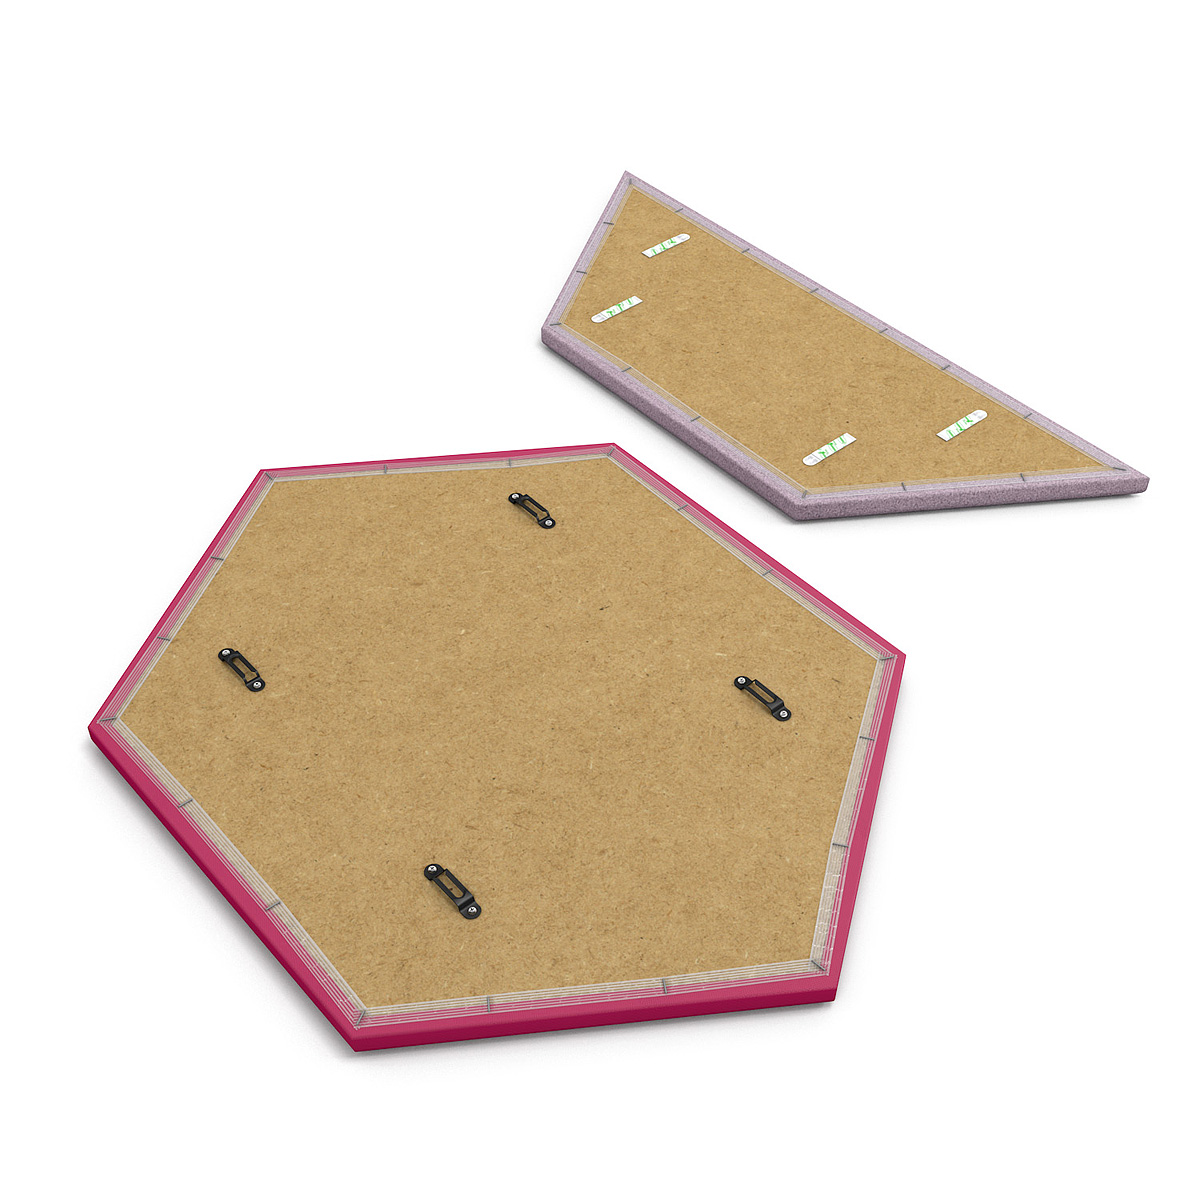 ZENARTRO™ Acoustic Wall Panels Have Two Easy-Fix Mounting Options - Keyhole Bracket or 3M Command™️ Strips